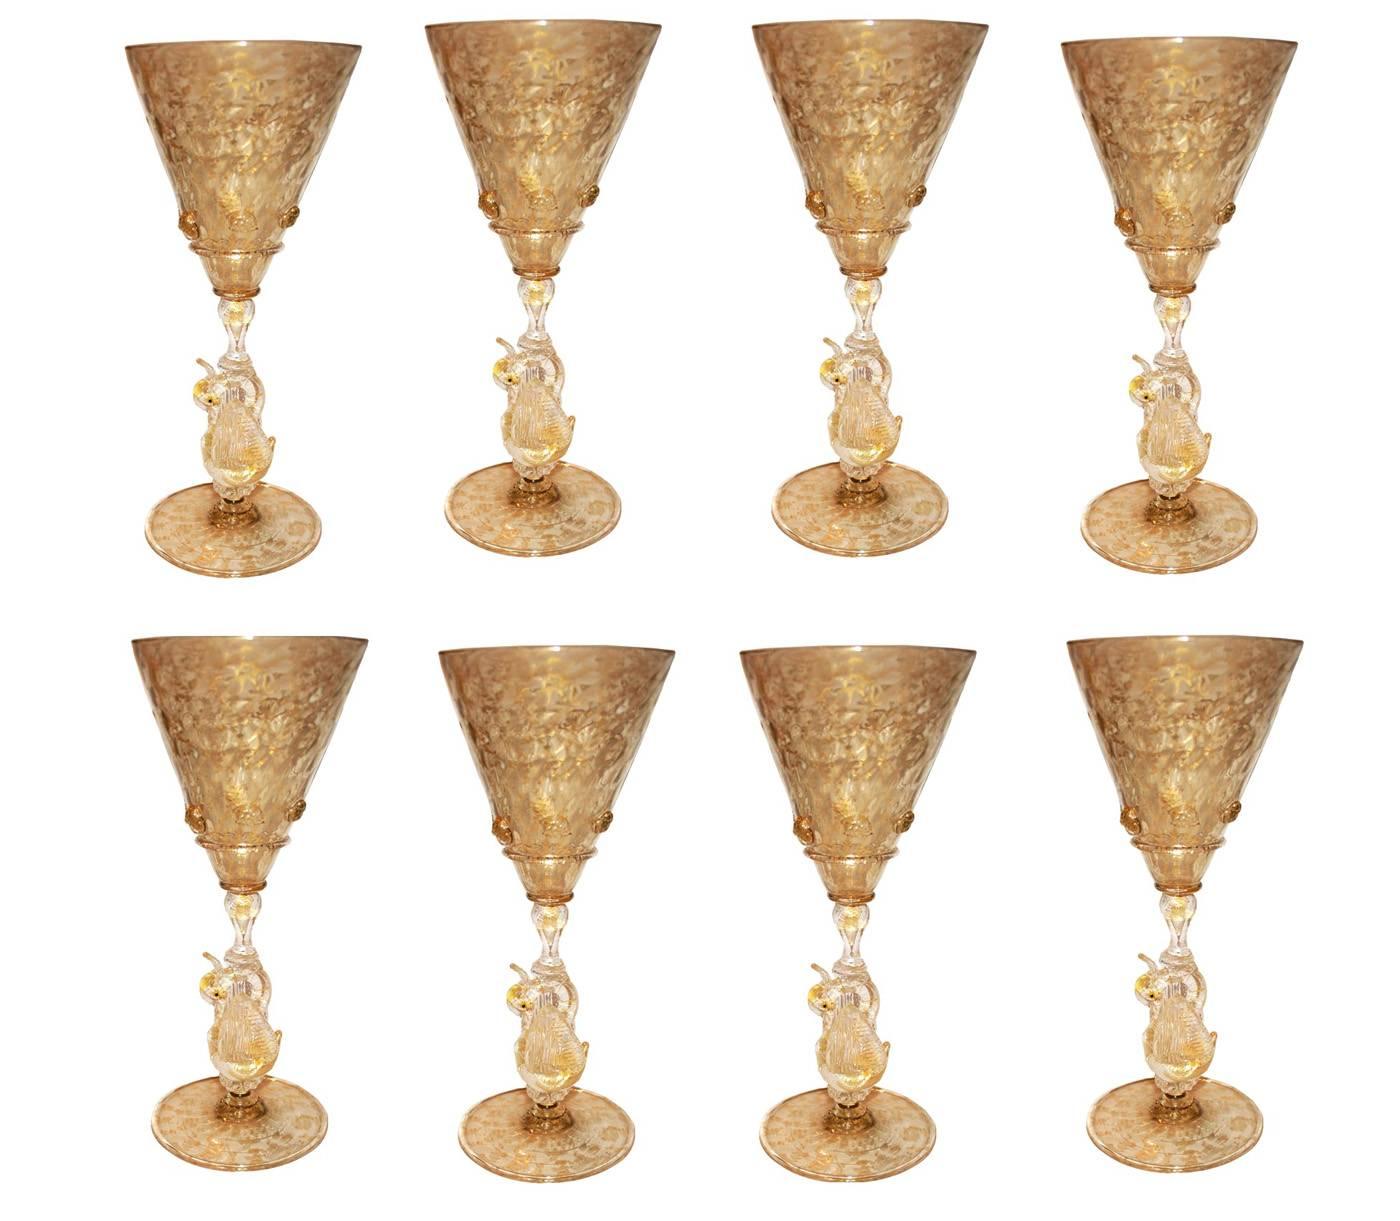 An amazing set of hand blown Venetian glass wine or water goblets. This set of eight features elegant swan stems and copious gold flakes throughout. The base and conical cup have a subtle ripple pattern. The cup is embellished with textured glass